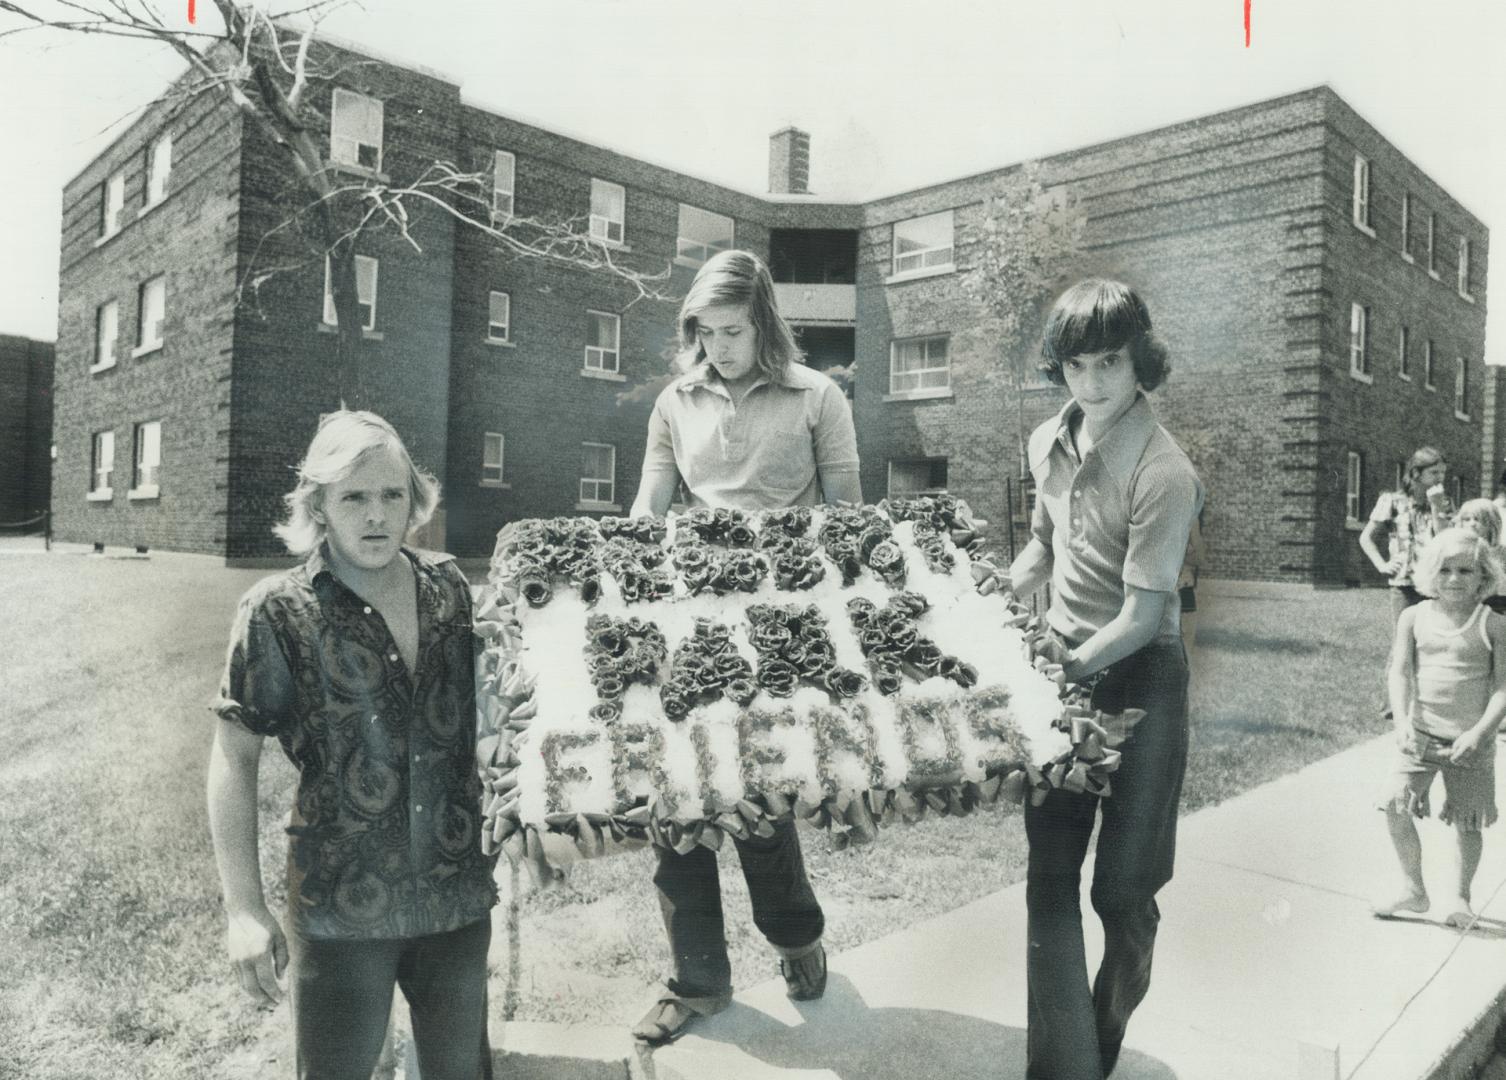 A $500 Wreath is held by the three boys who bought it for $81